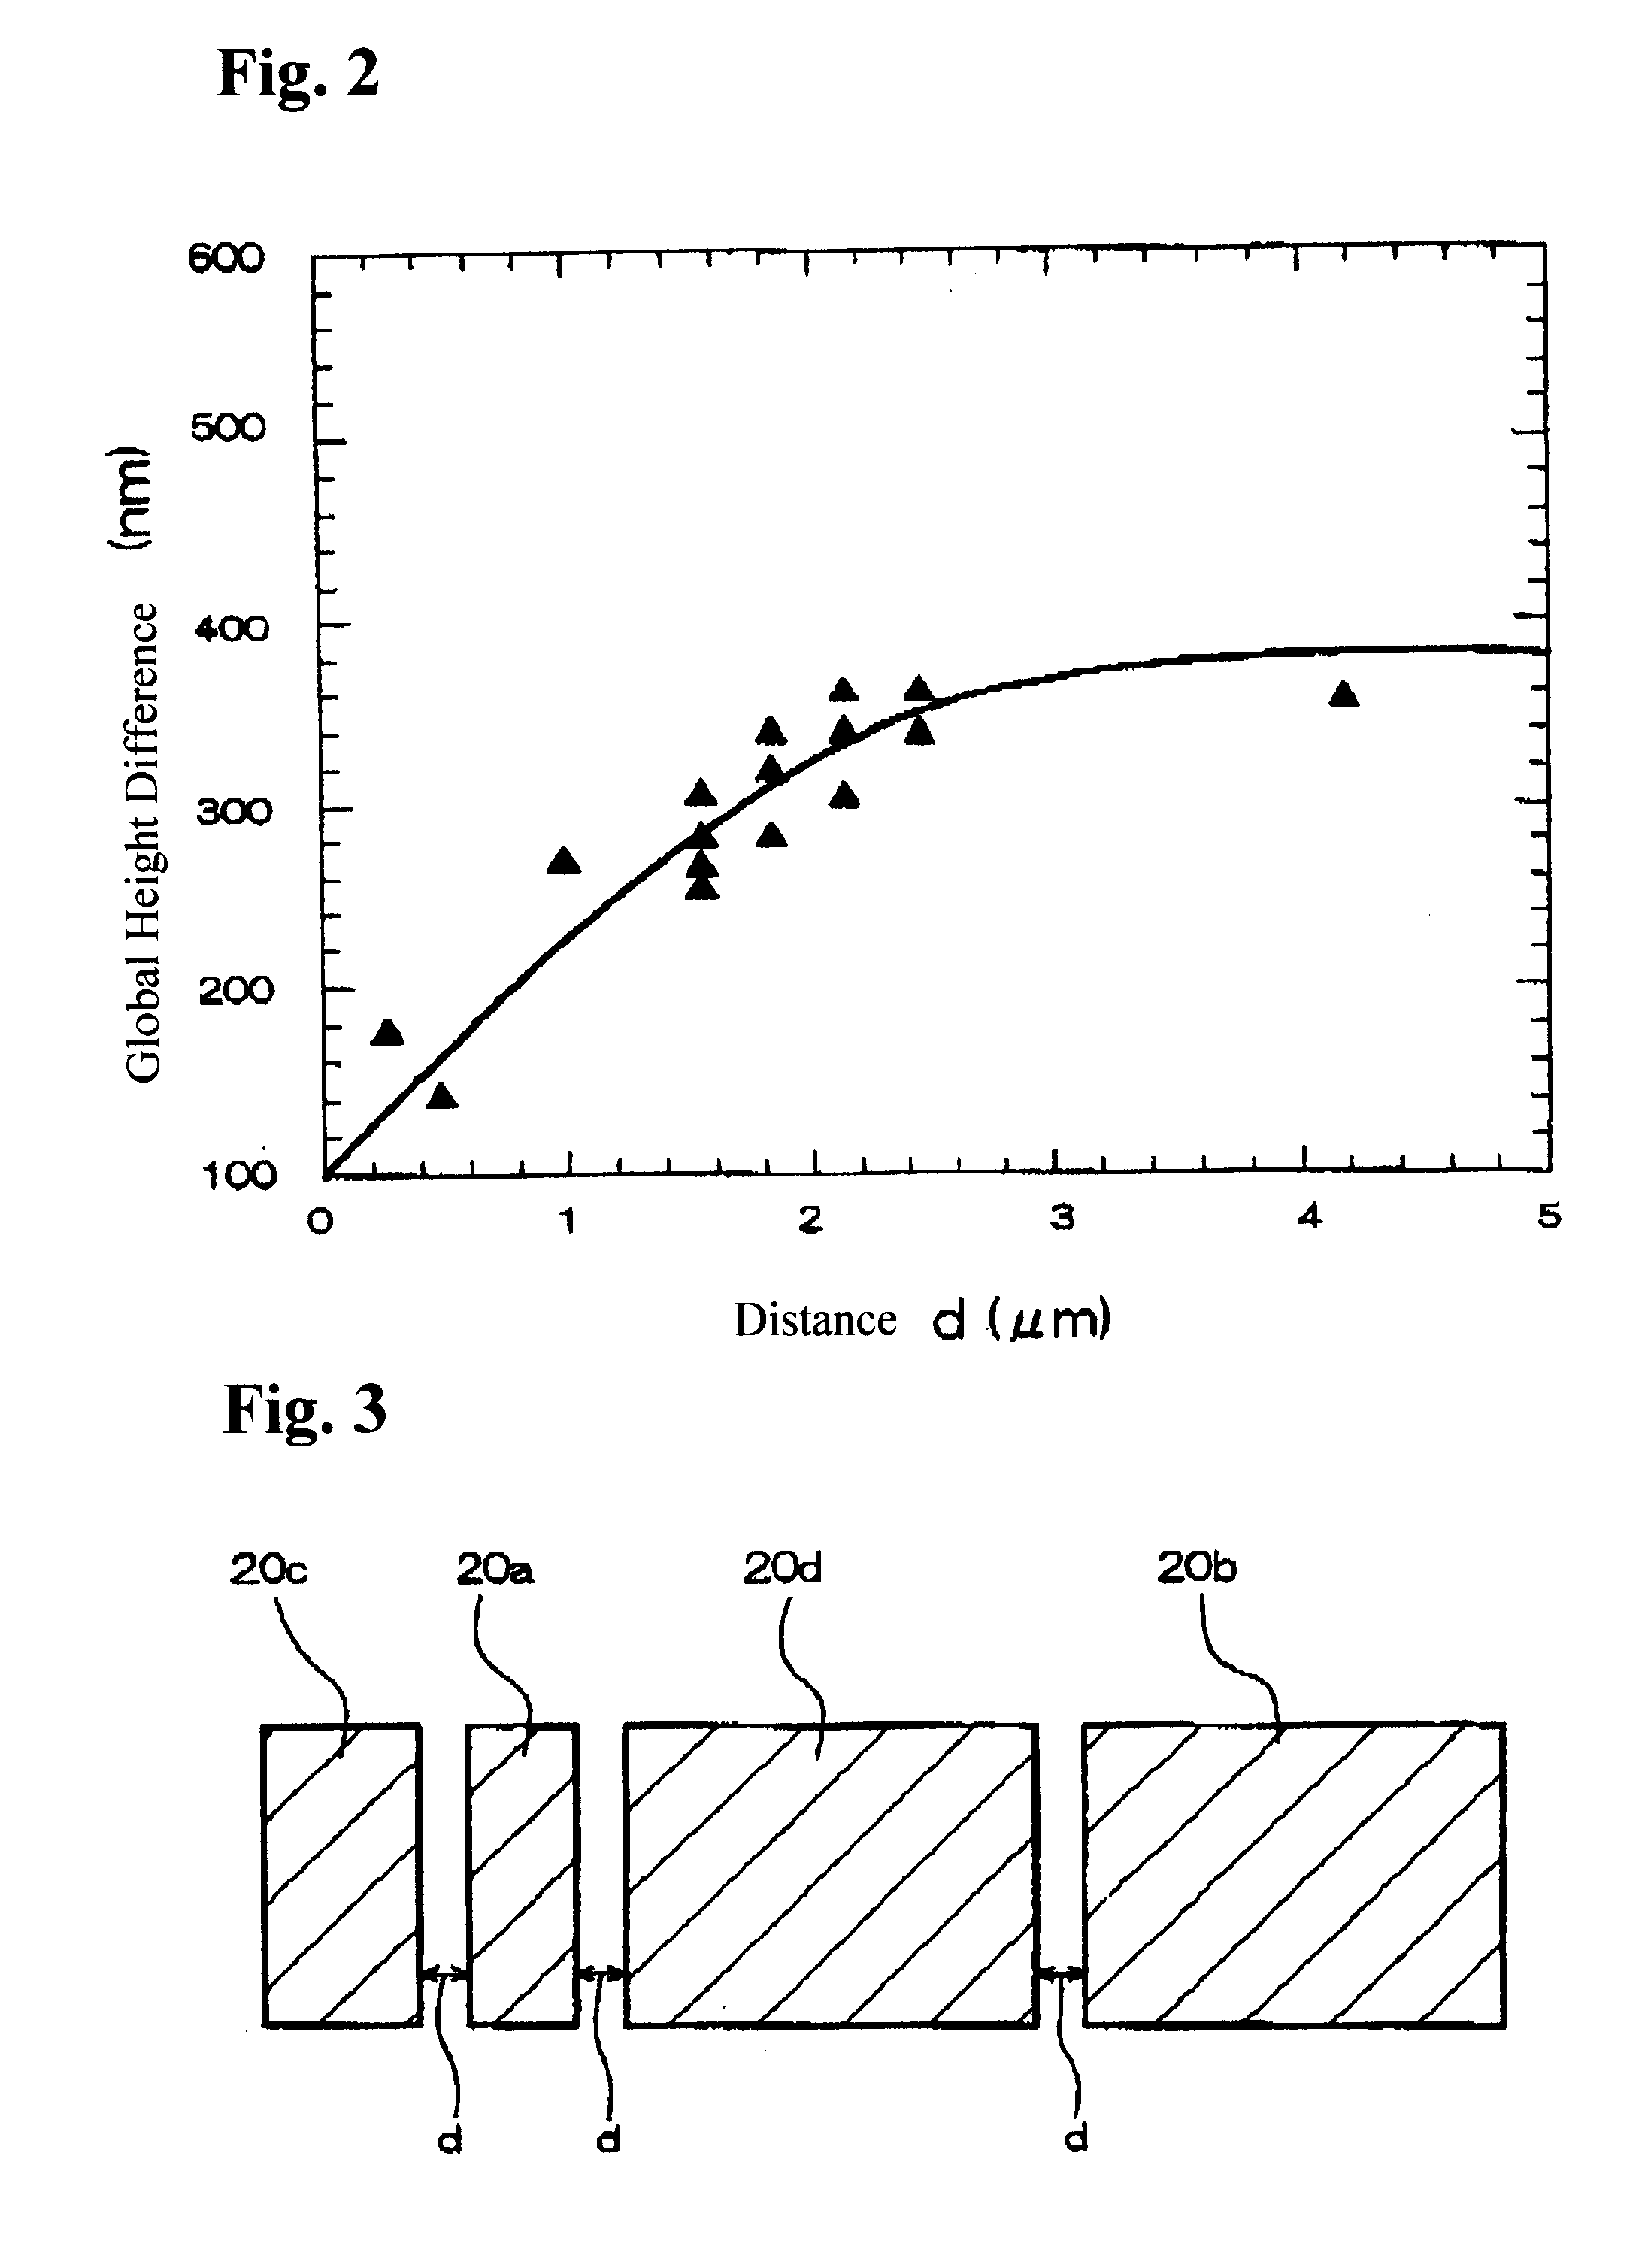 Semiconductor device and method for making pattern data